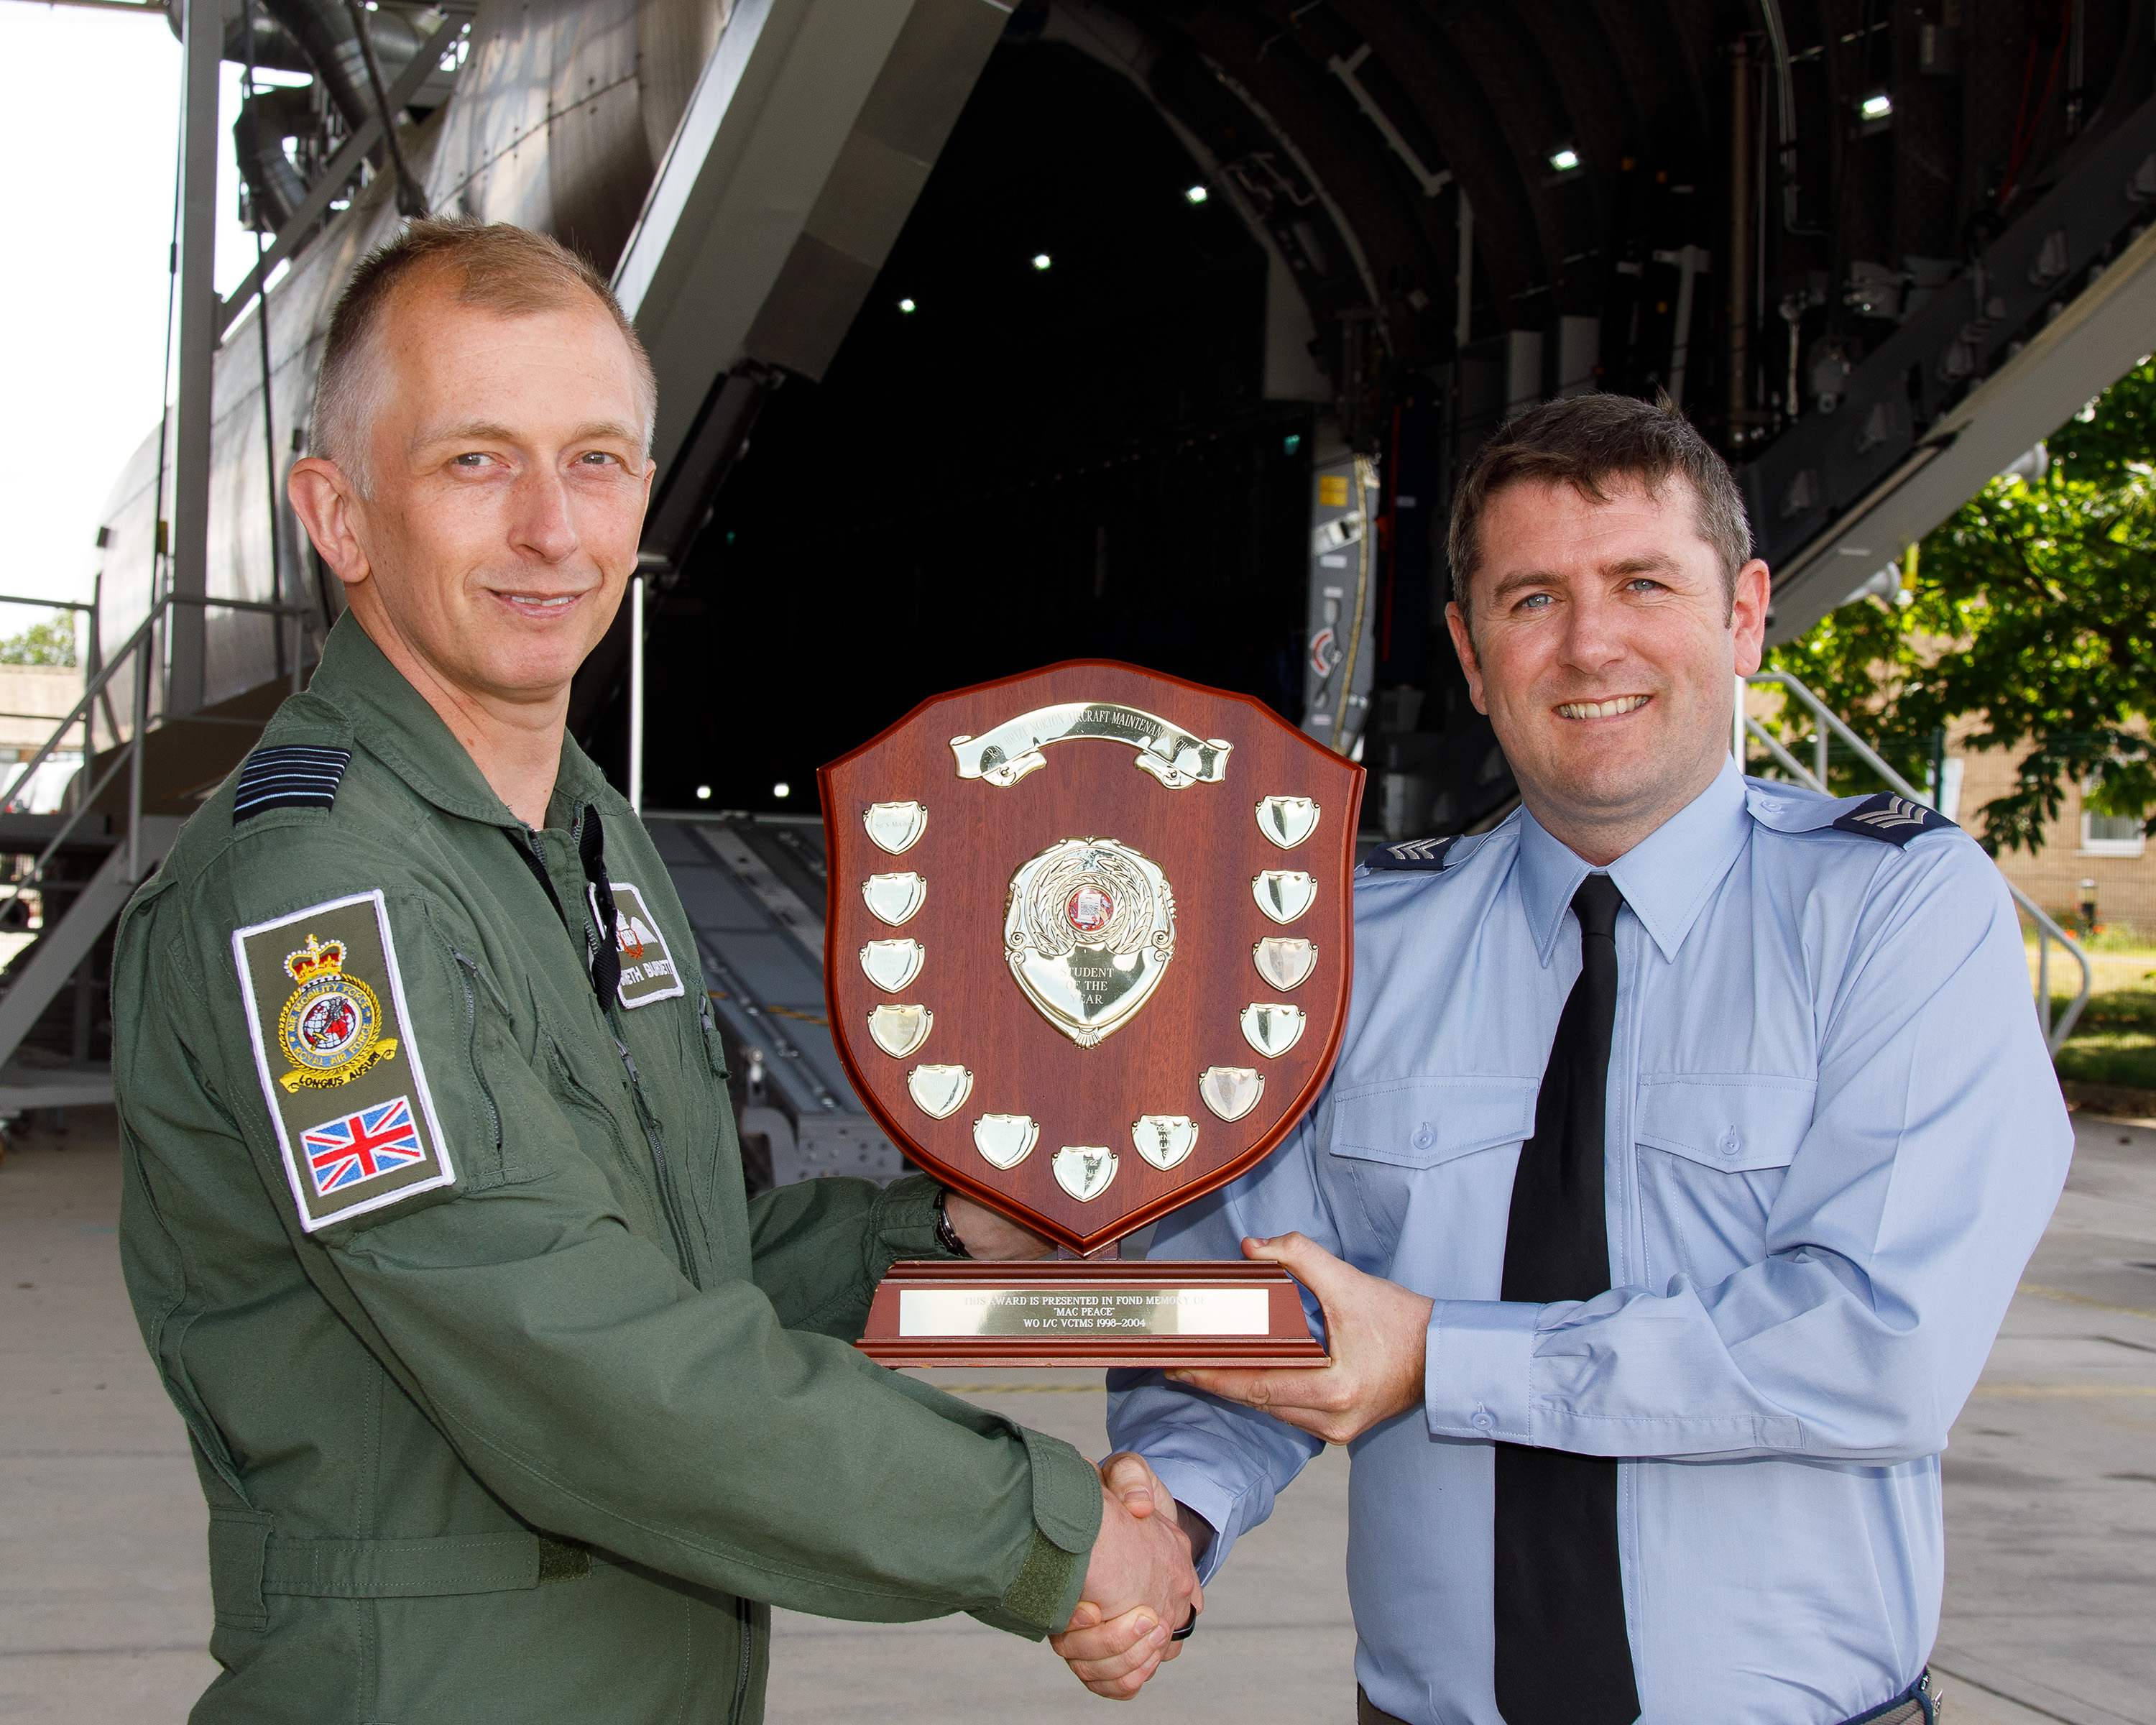 Group Captain Burdett - Commander Air Wing and Sergeant Williams